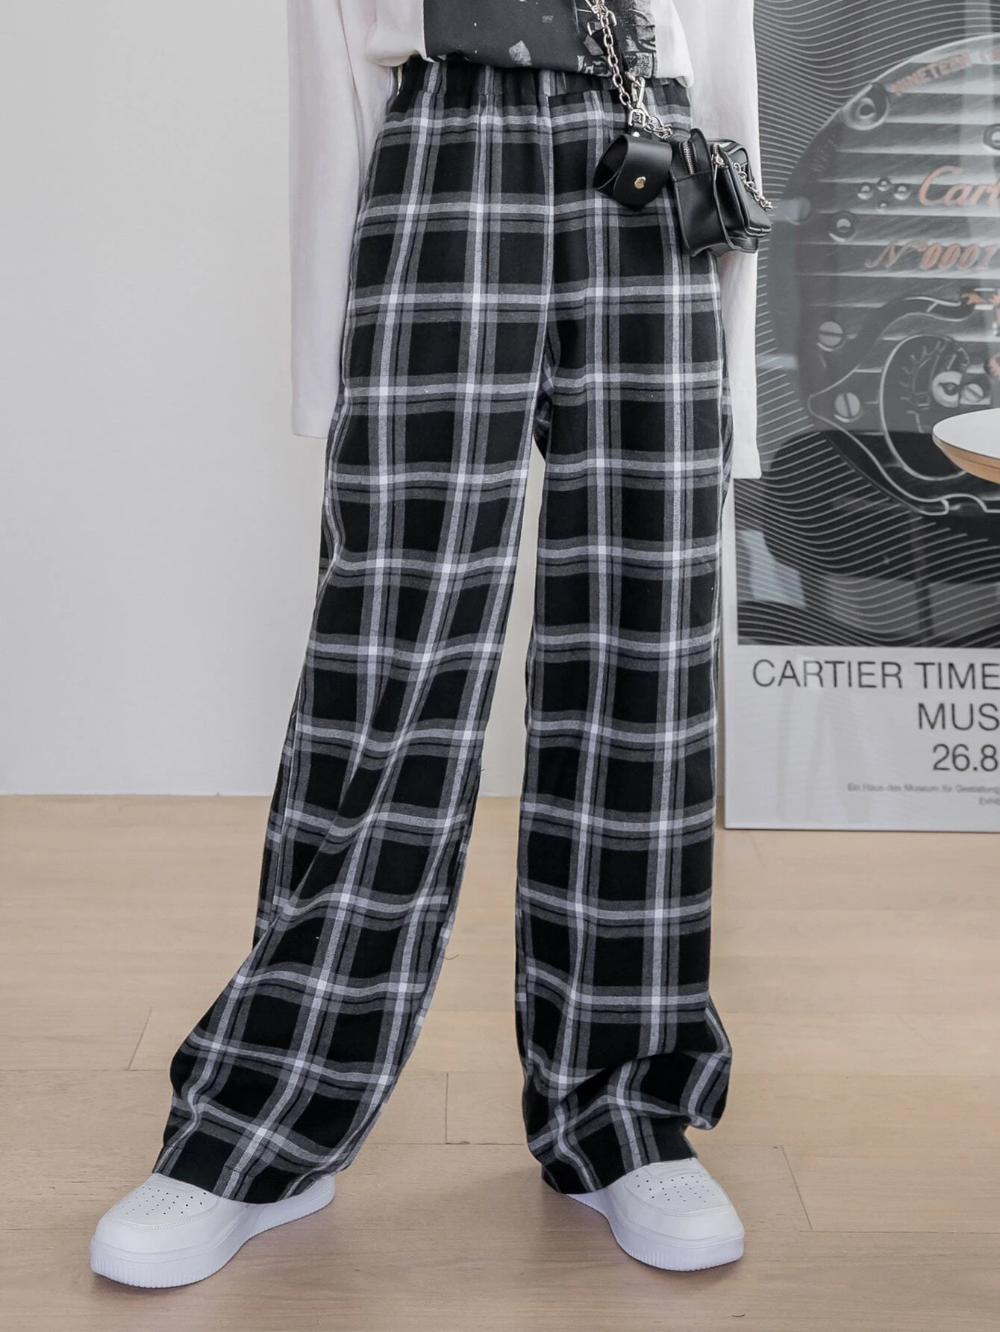 How to Style Plaid Pajama Pants: Outfits for Looking Good at Home for Ladies